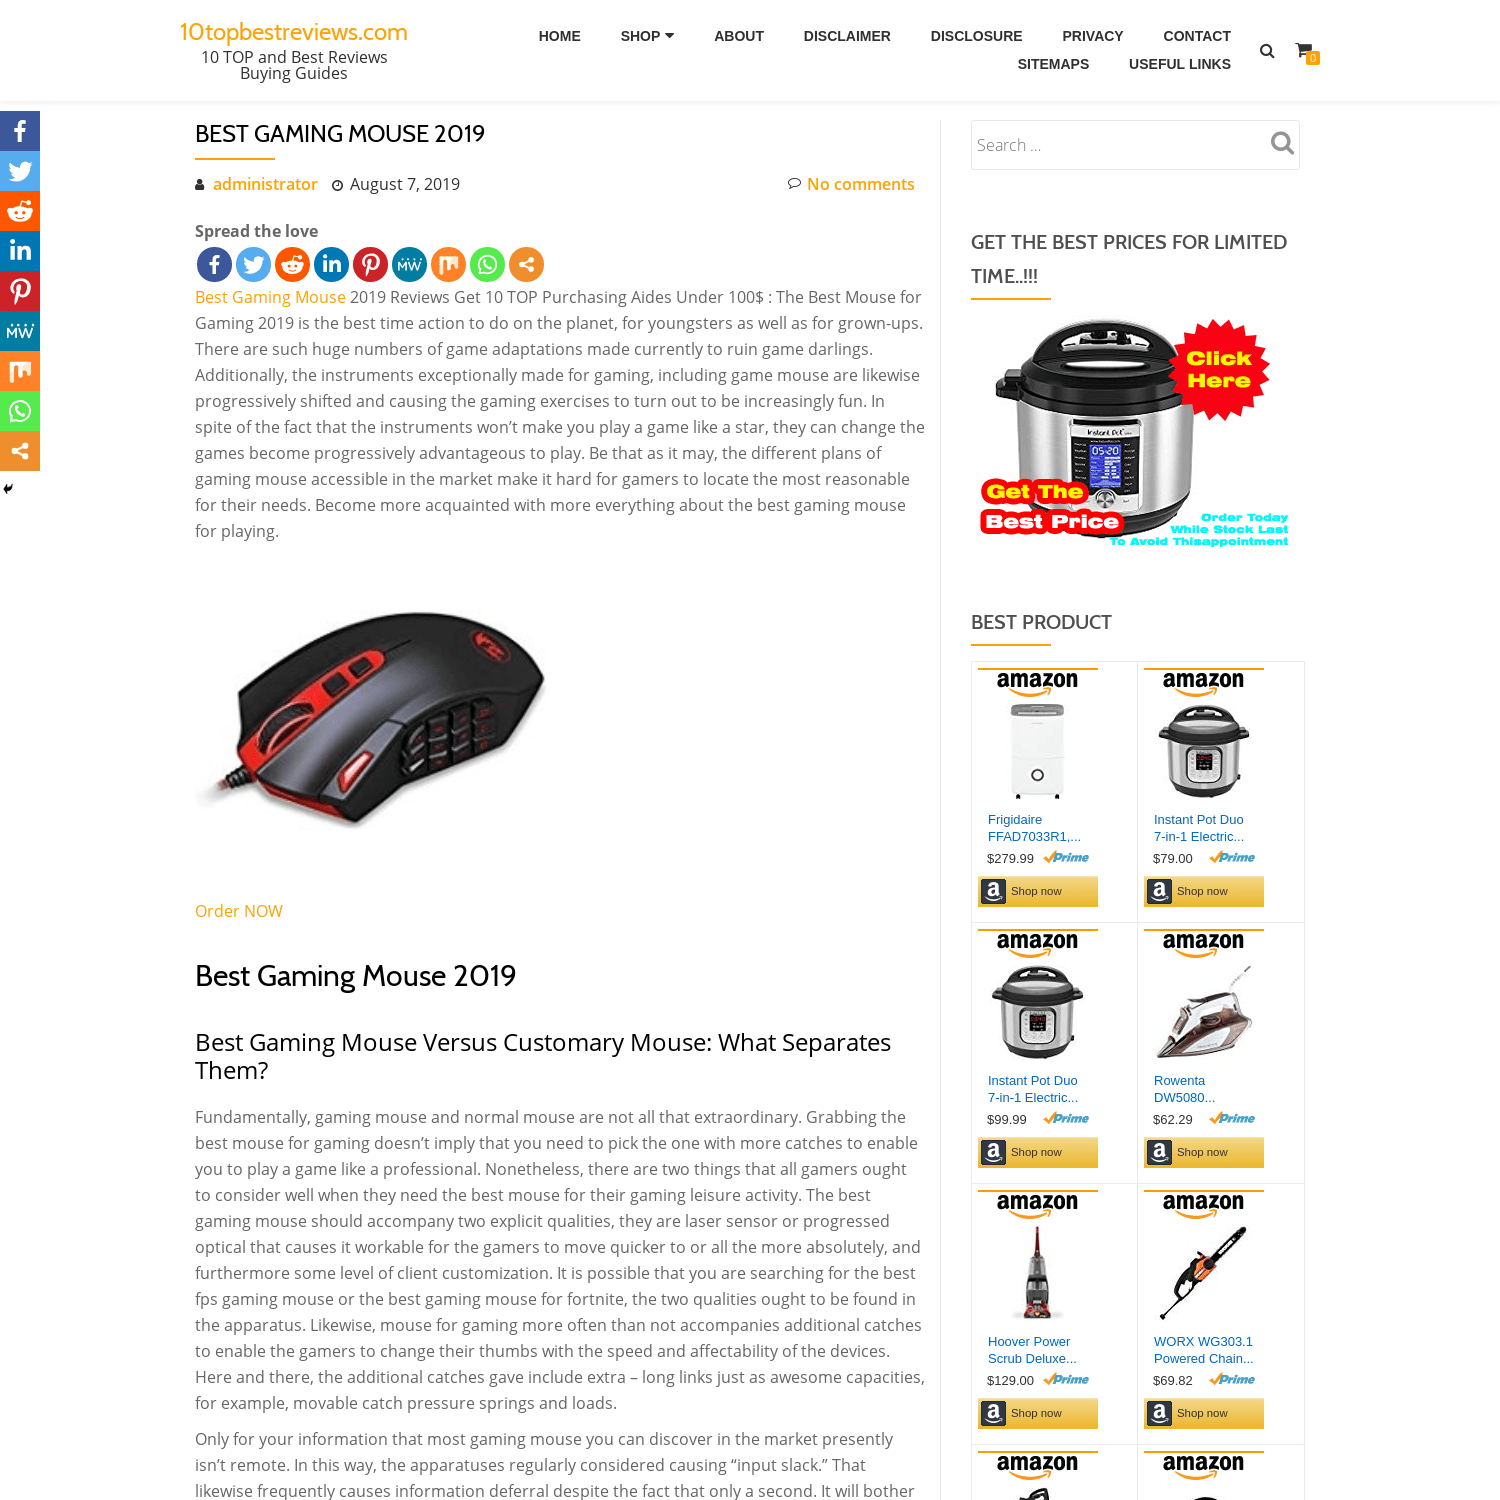 http://www.10topbestreviews.com/best-gaming-mouse-2019